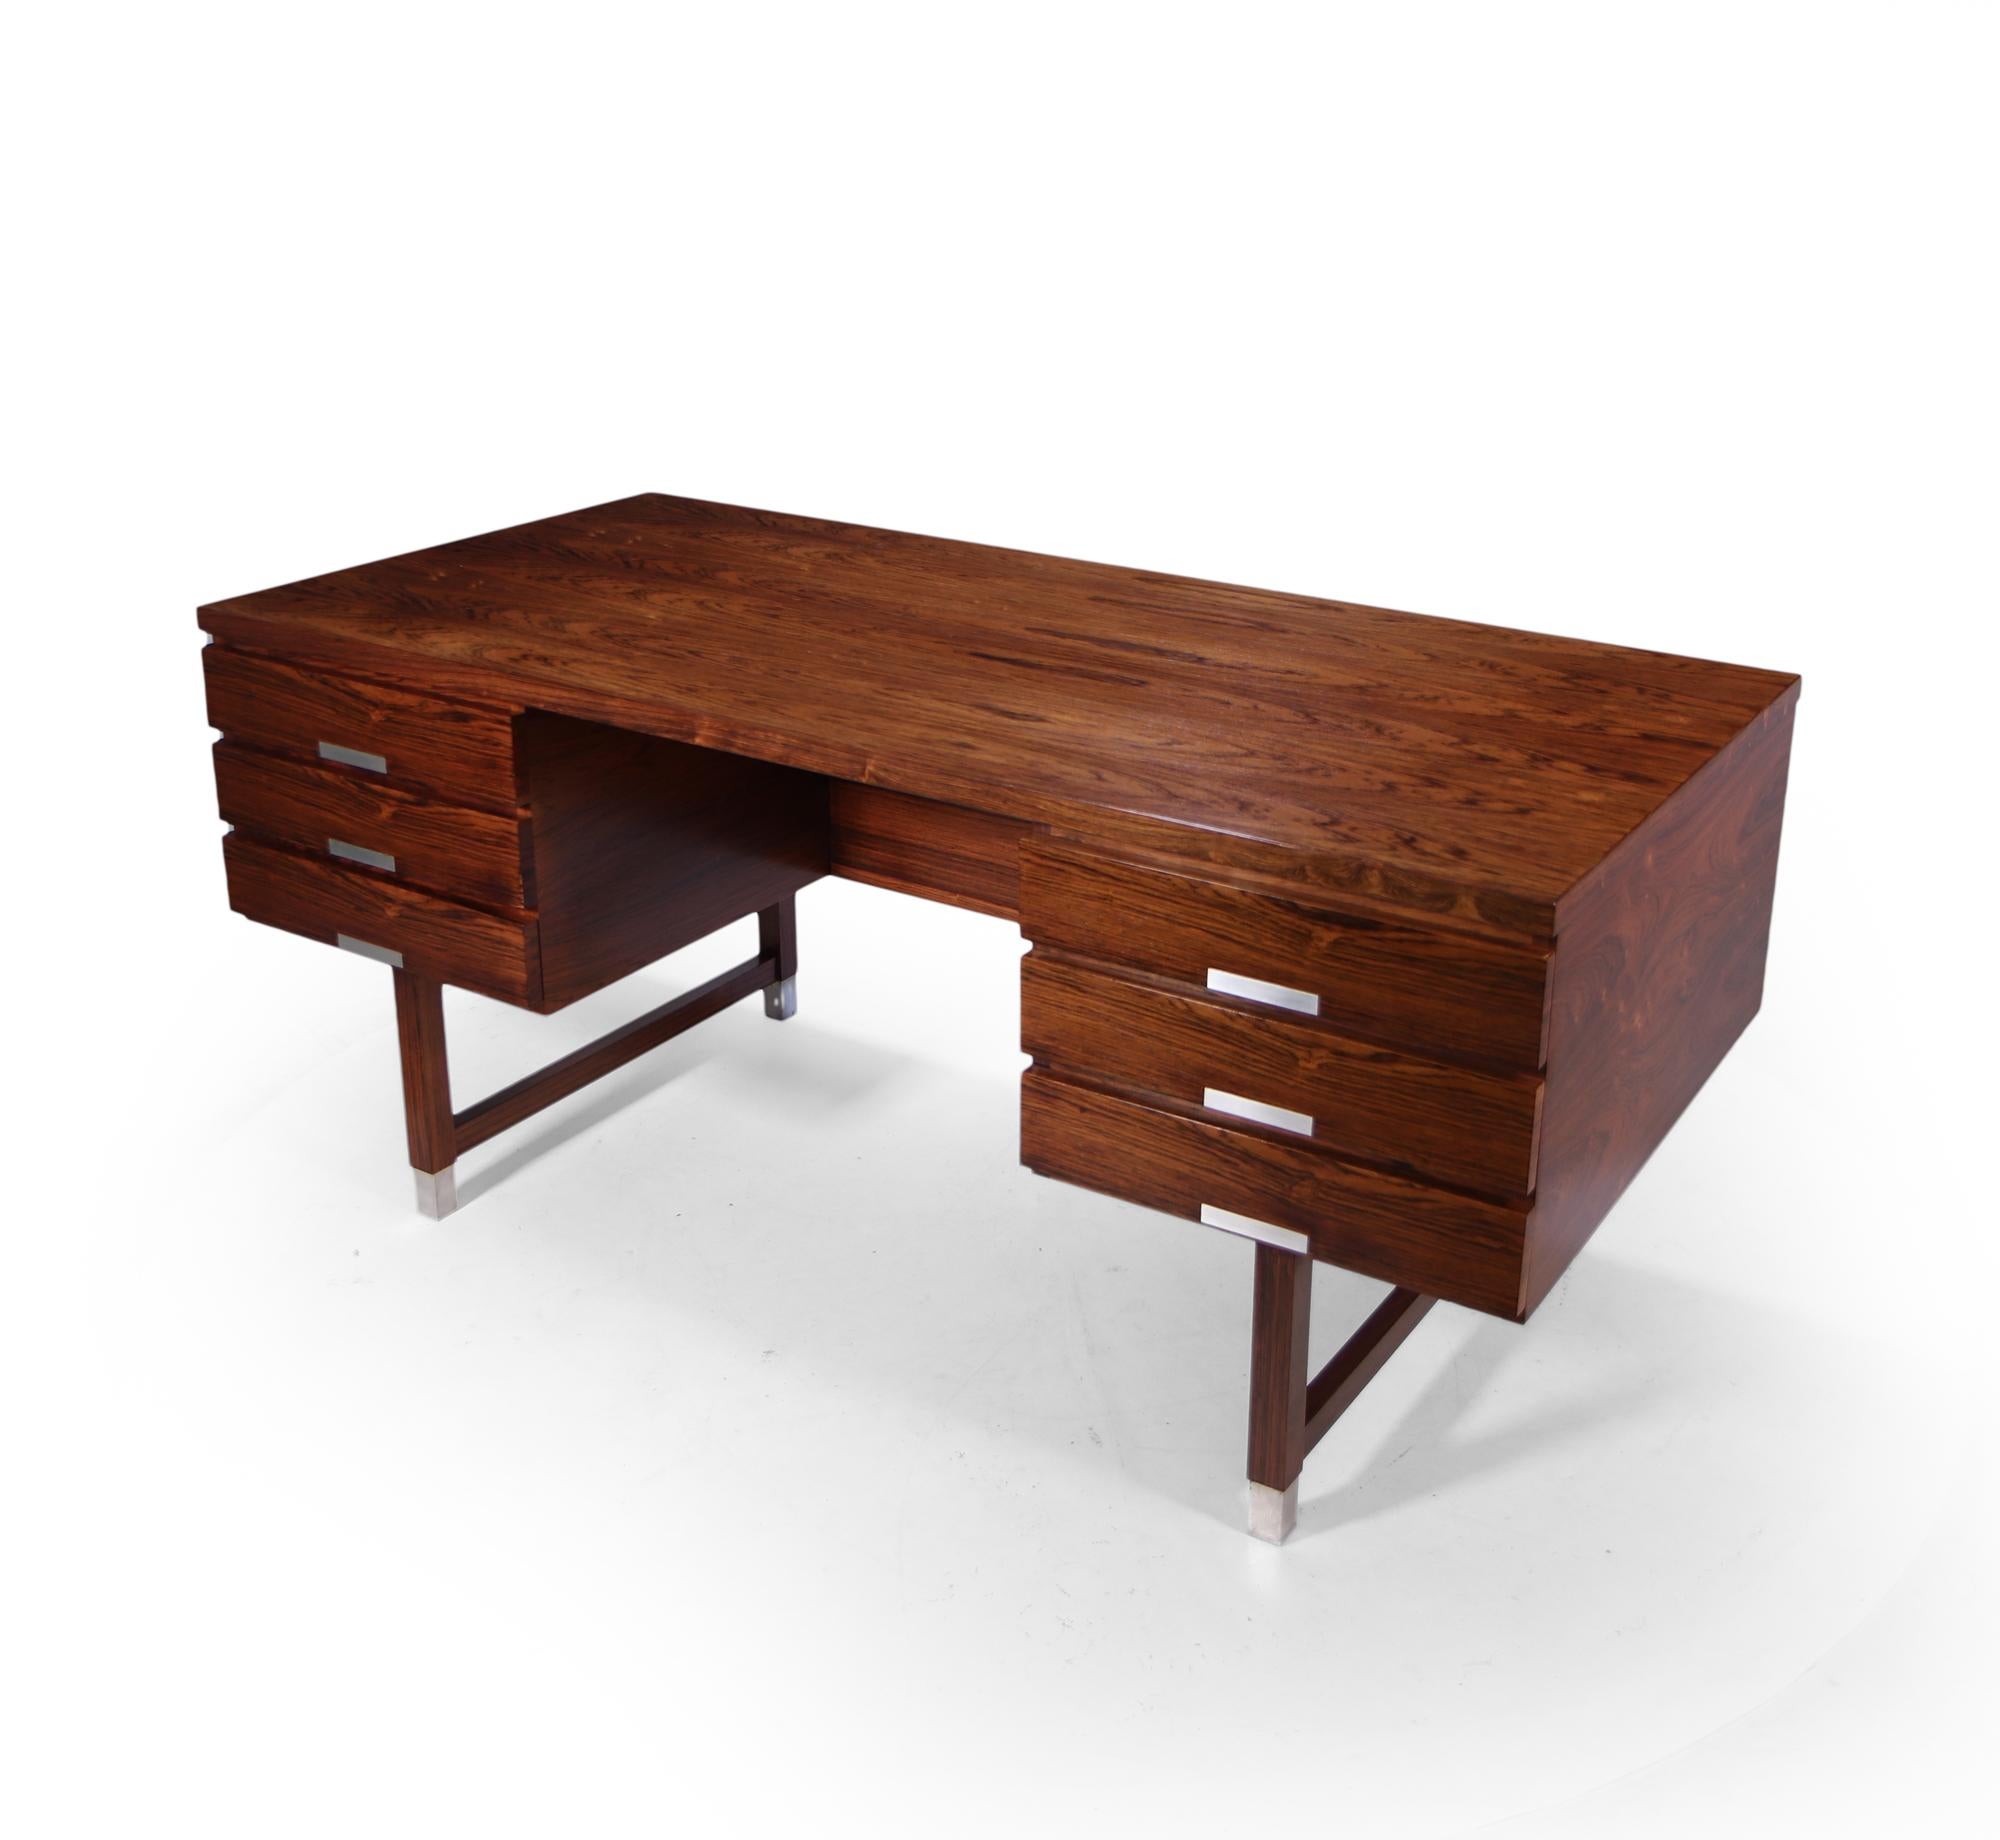 A very stylish desirable mid century rosewood desk designed and produced by Ejgil Petersen in the 1960’s, having six drawers and open bookshelf to the back making it completely freestanding. Aluminium handles and feet tips, in very good condition